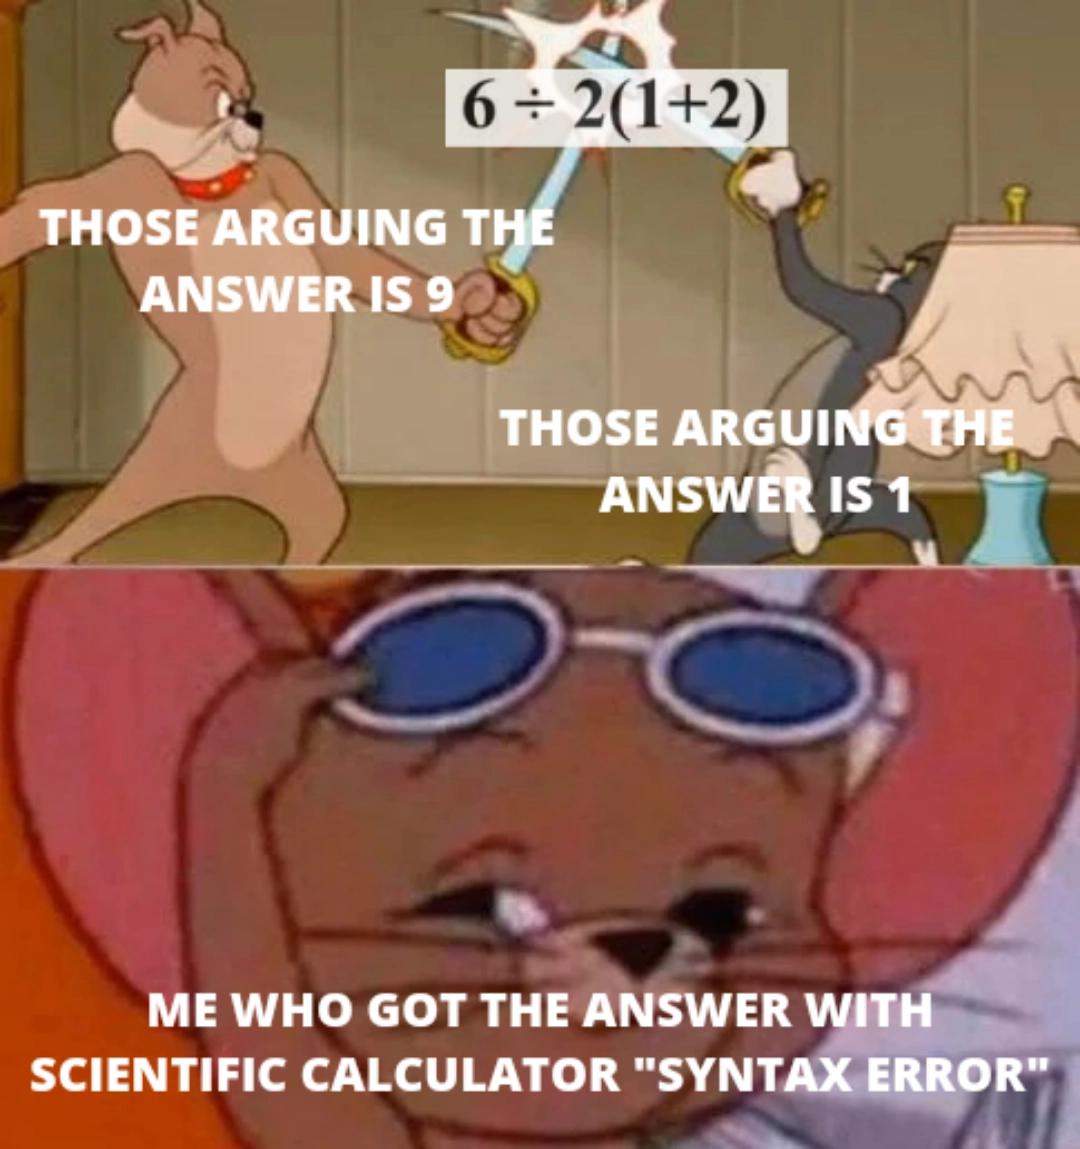 dank memes - funny memes - sokeefe memes clean - 6 212 Those Arguing The Answer Is 9 und Those Arguing The Answer Is 1 Me Who Got The Answer With Scientific Calculator "Syntax Error"